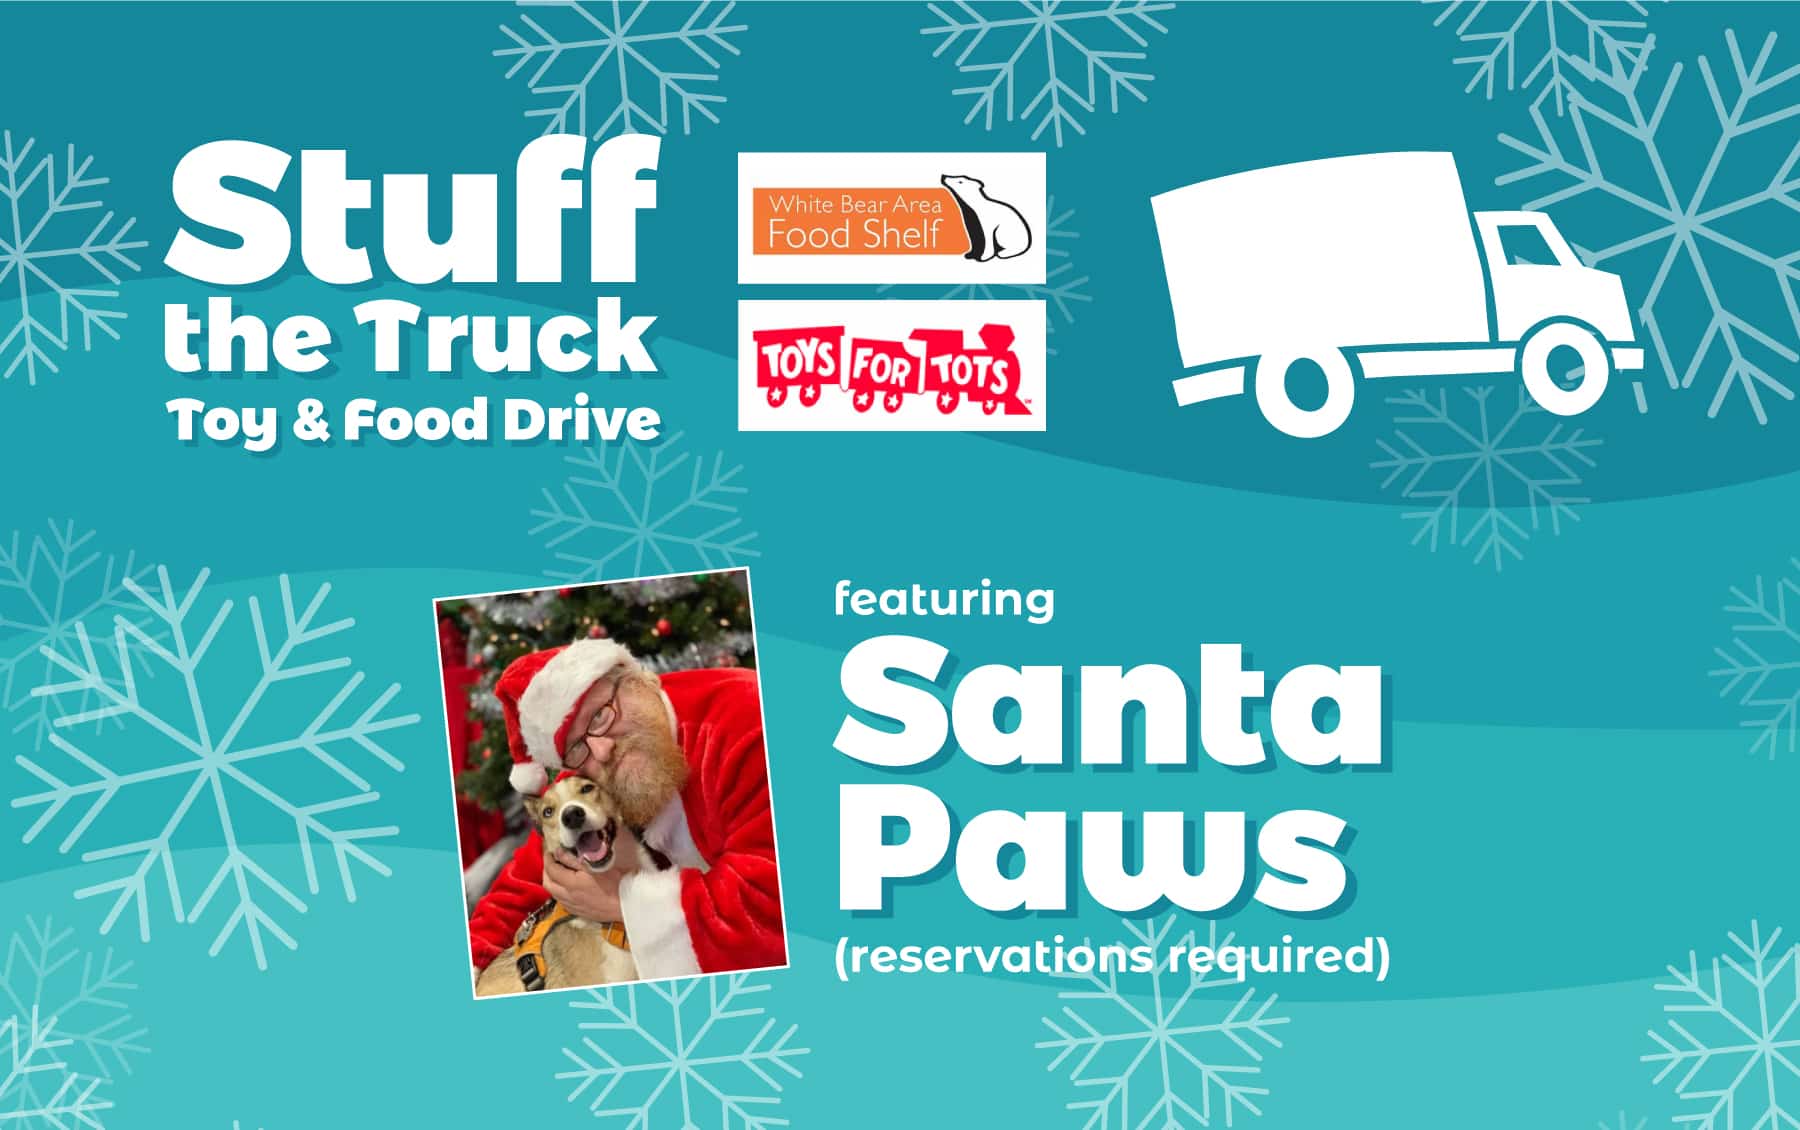 Promotional graphic for Stuff the Truck Toy & Food Drive featuring Santa Paws (reservations required)